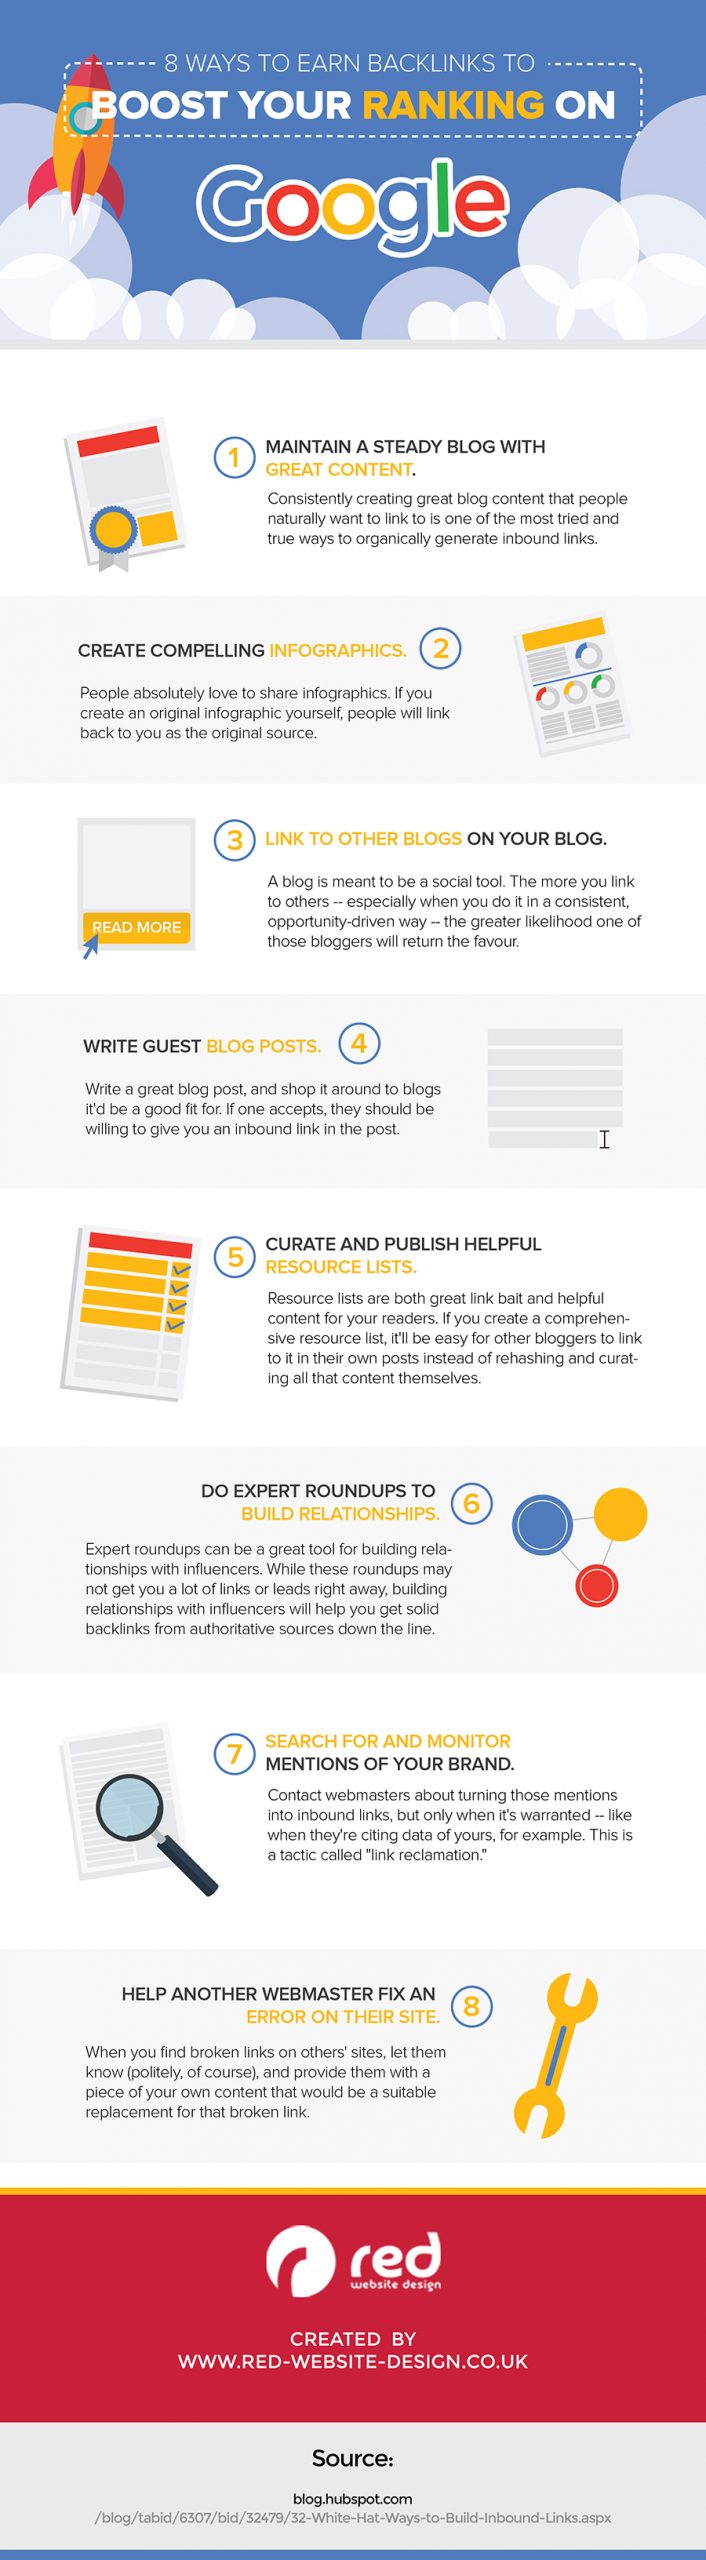 Infographic on SEO search techniques.